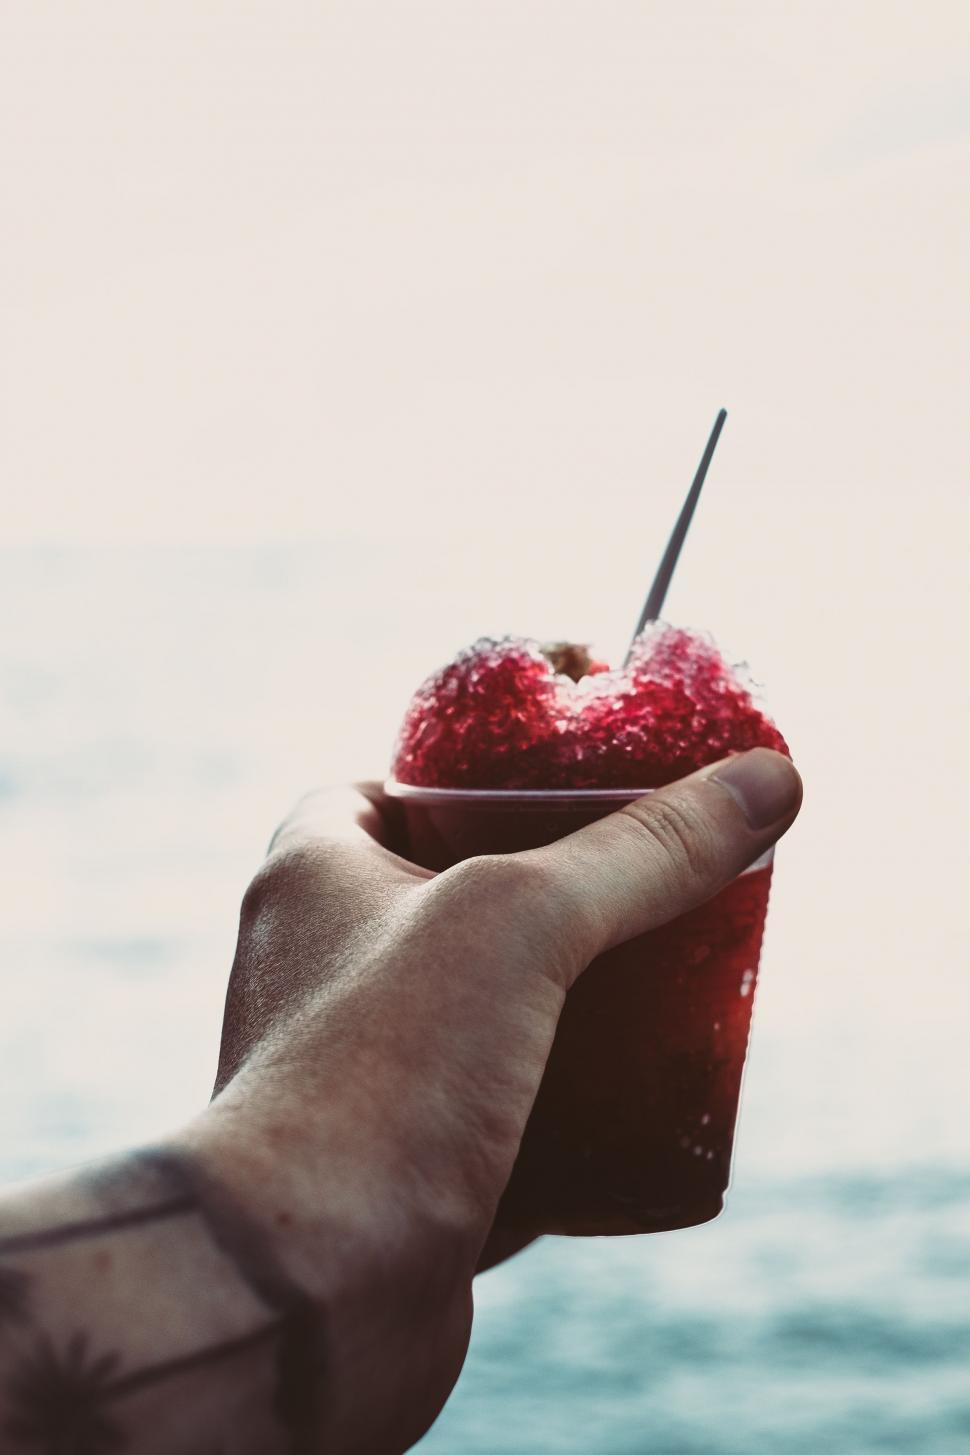 Free Image of Hand Holding Cup With Strawberries 